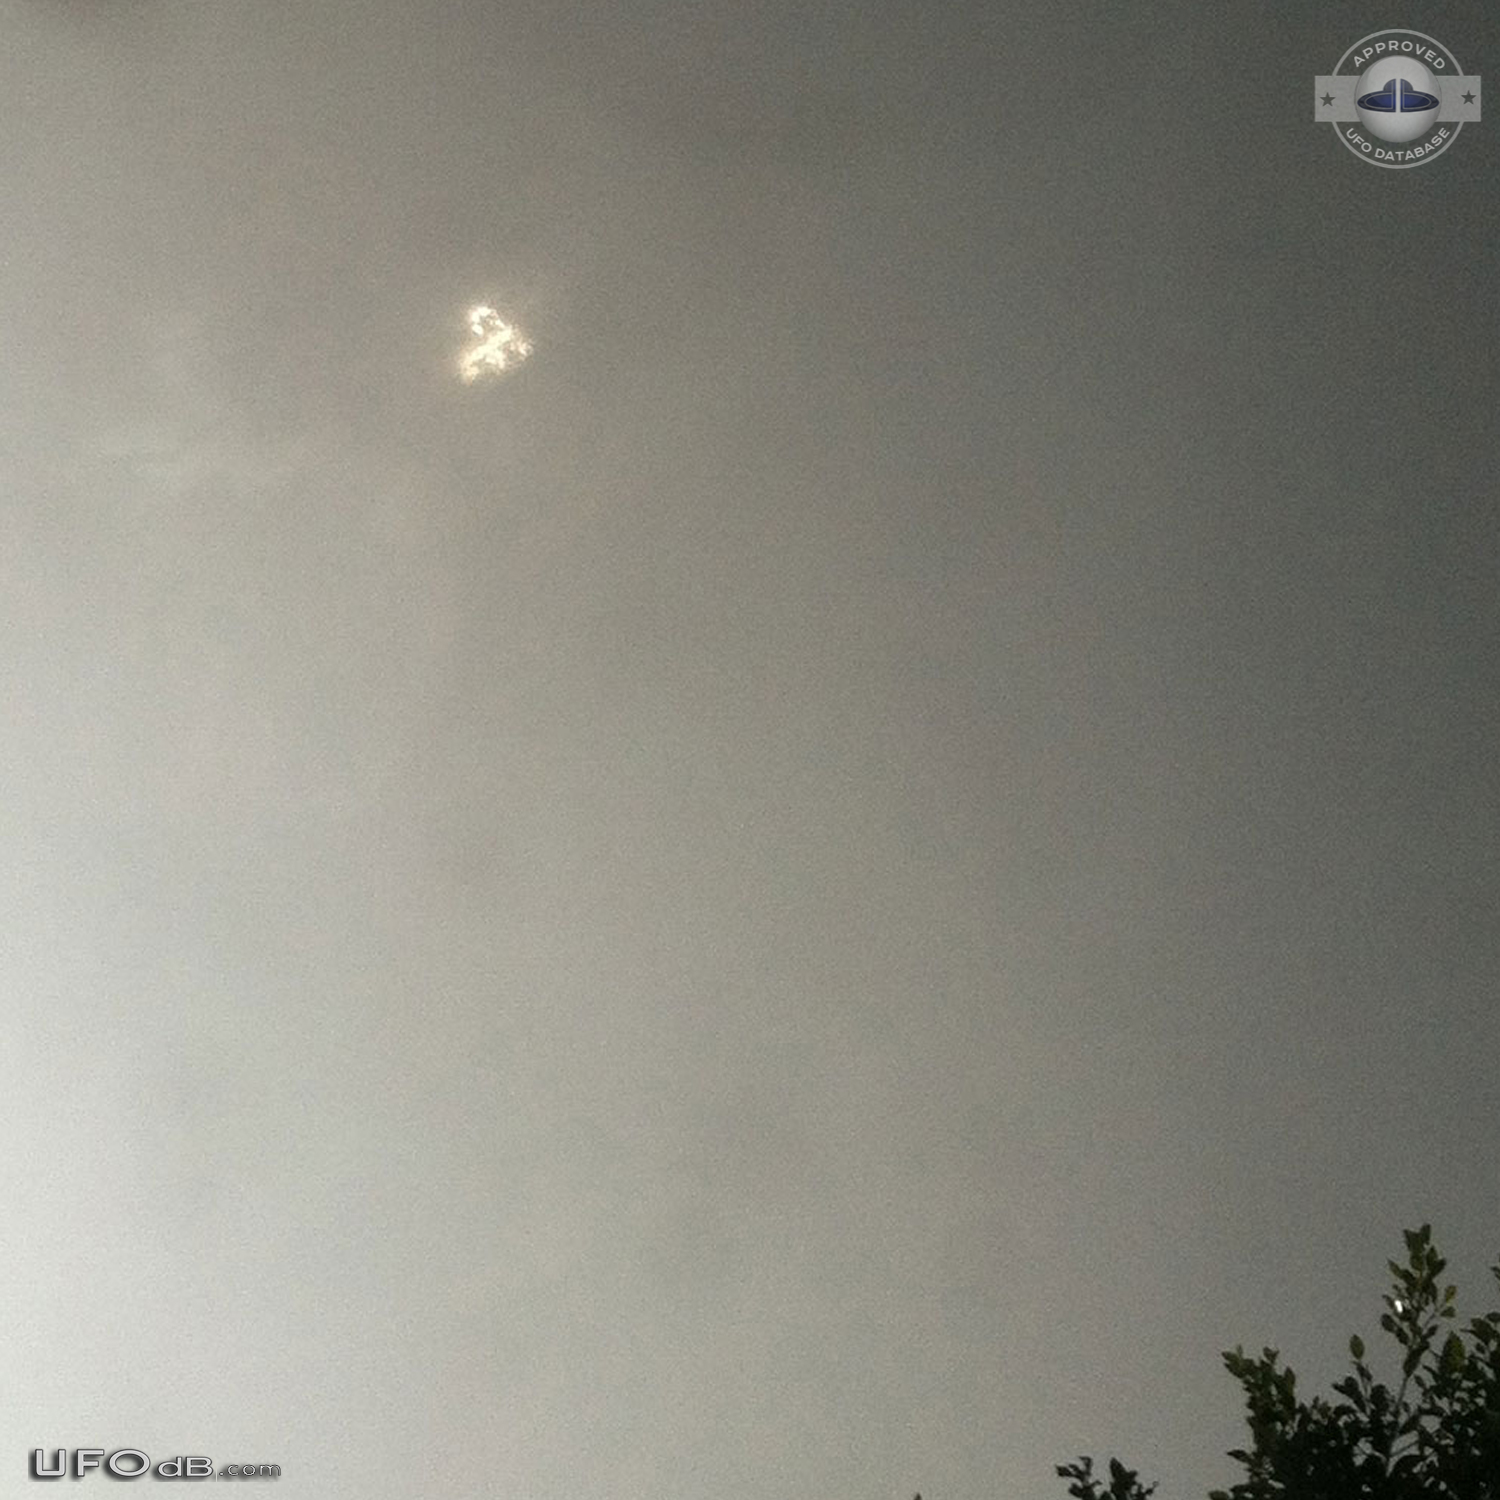 UFO appeared, disappeared and appeared again in Los Angeles CA 2015 UFO Picture #651-2